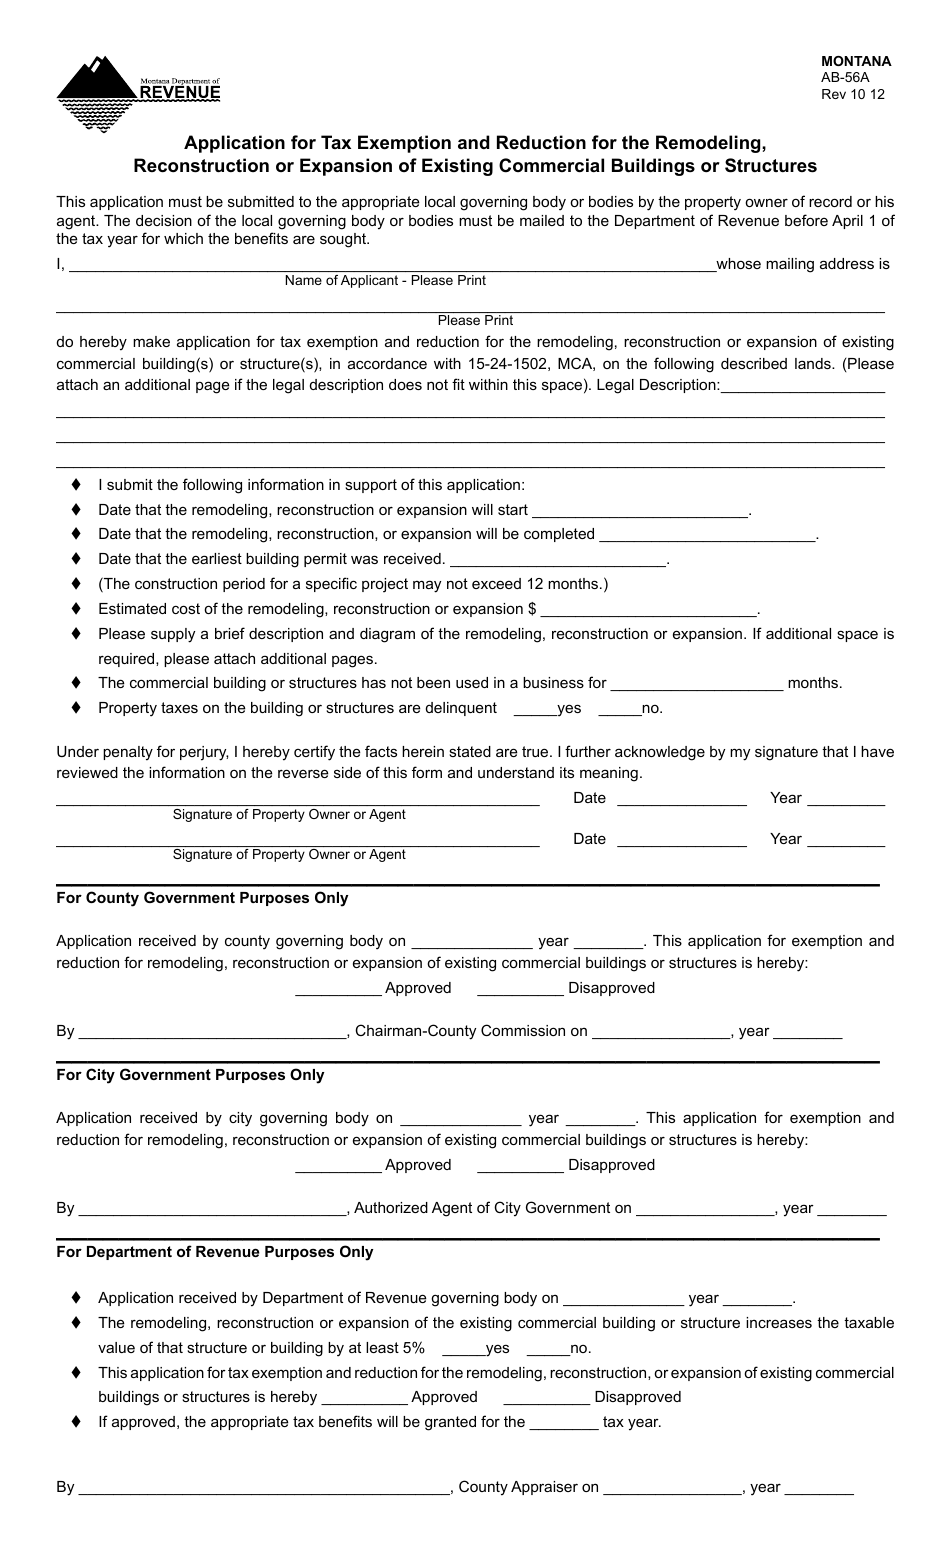 Form AB-56A Application for Tax Exemption and Reduction for the Remodeling, Reconstruction or Expansion of Existing Commercial Buildings or Structures - Montana, Page 1